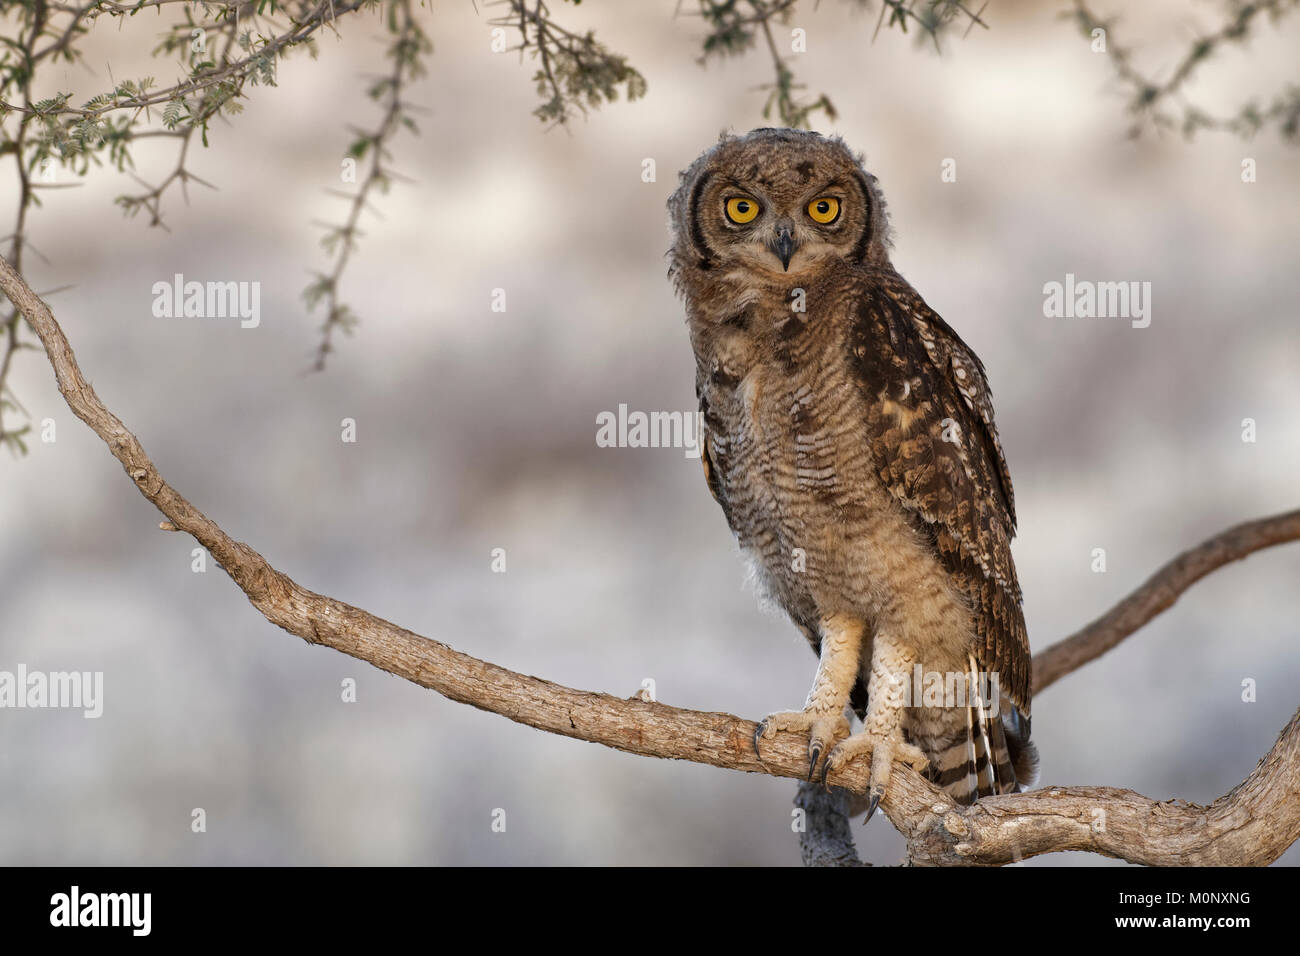 Spotted eagle-owl (Bubo africanus),young bird perched on a tree branch,Kgalagadi Transfrontier Park,Northern Cape Stock Photo